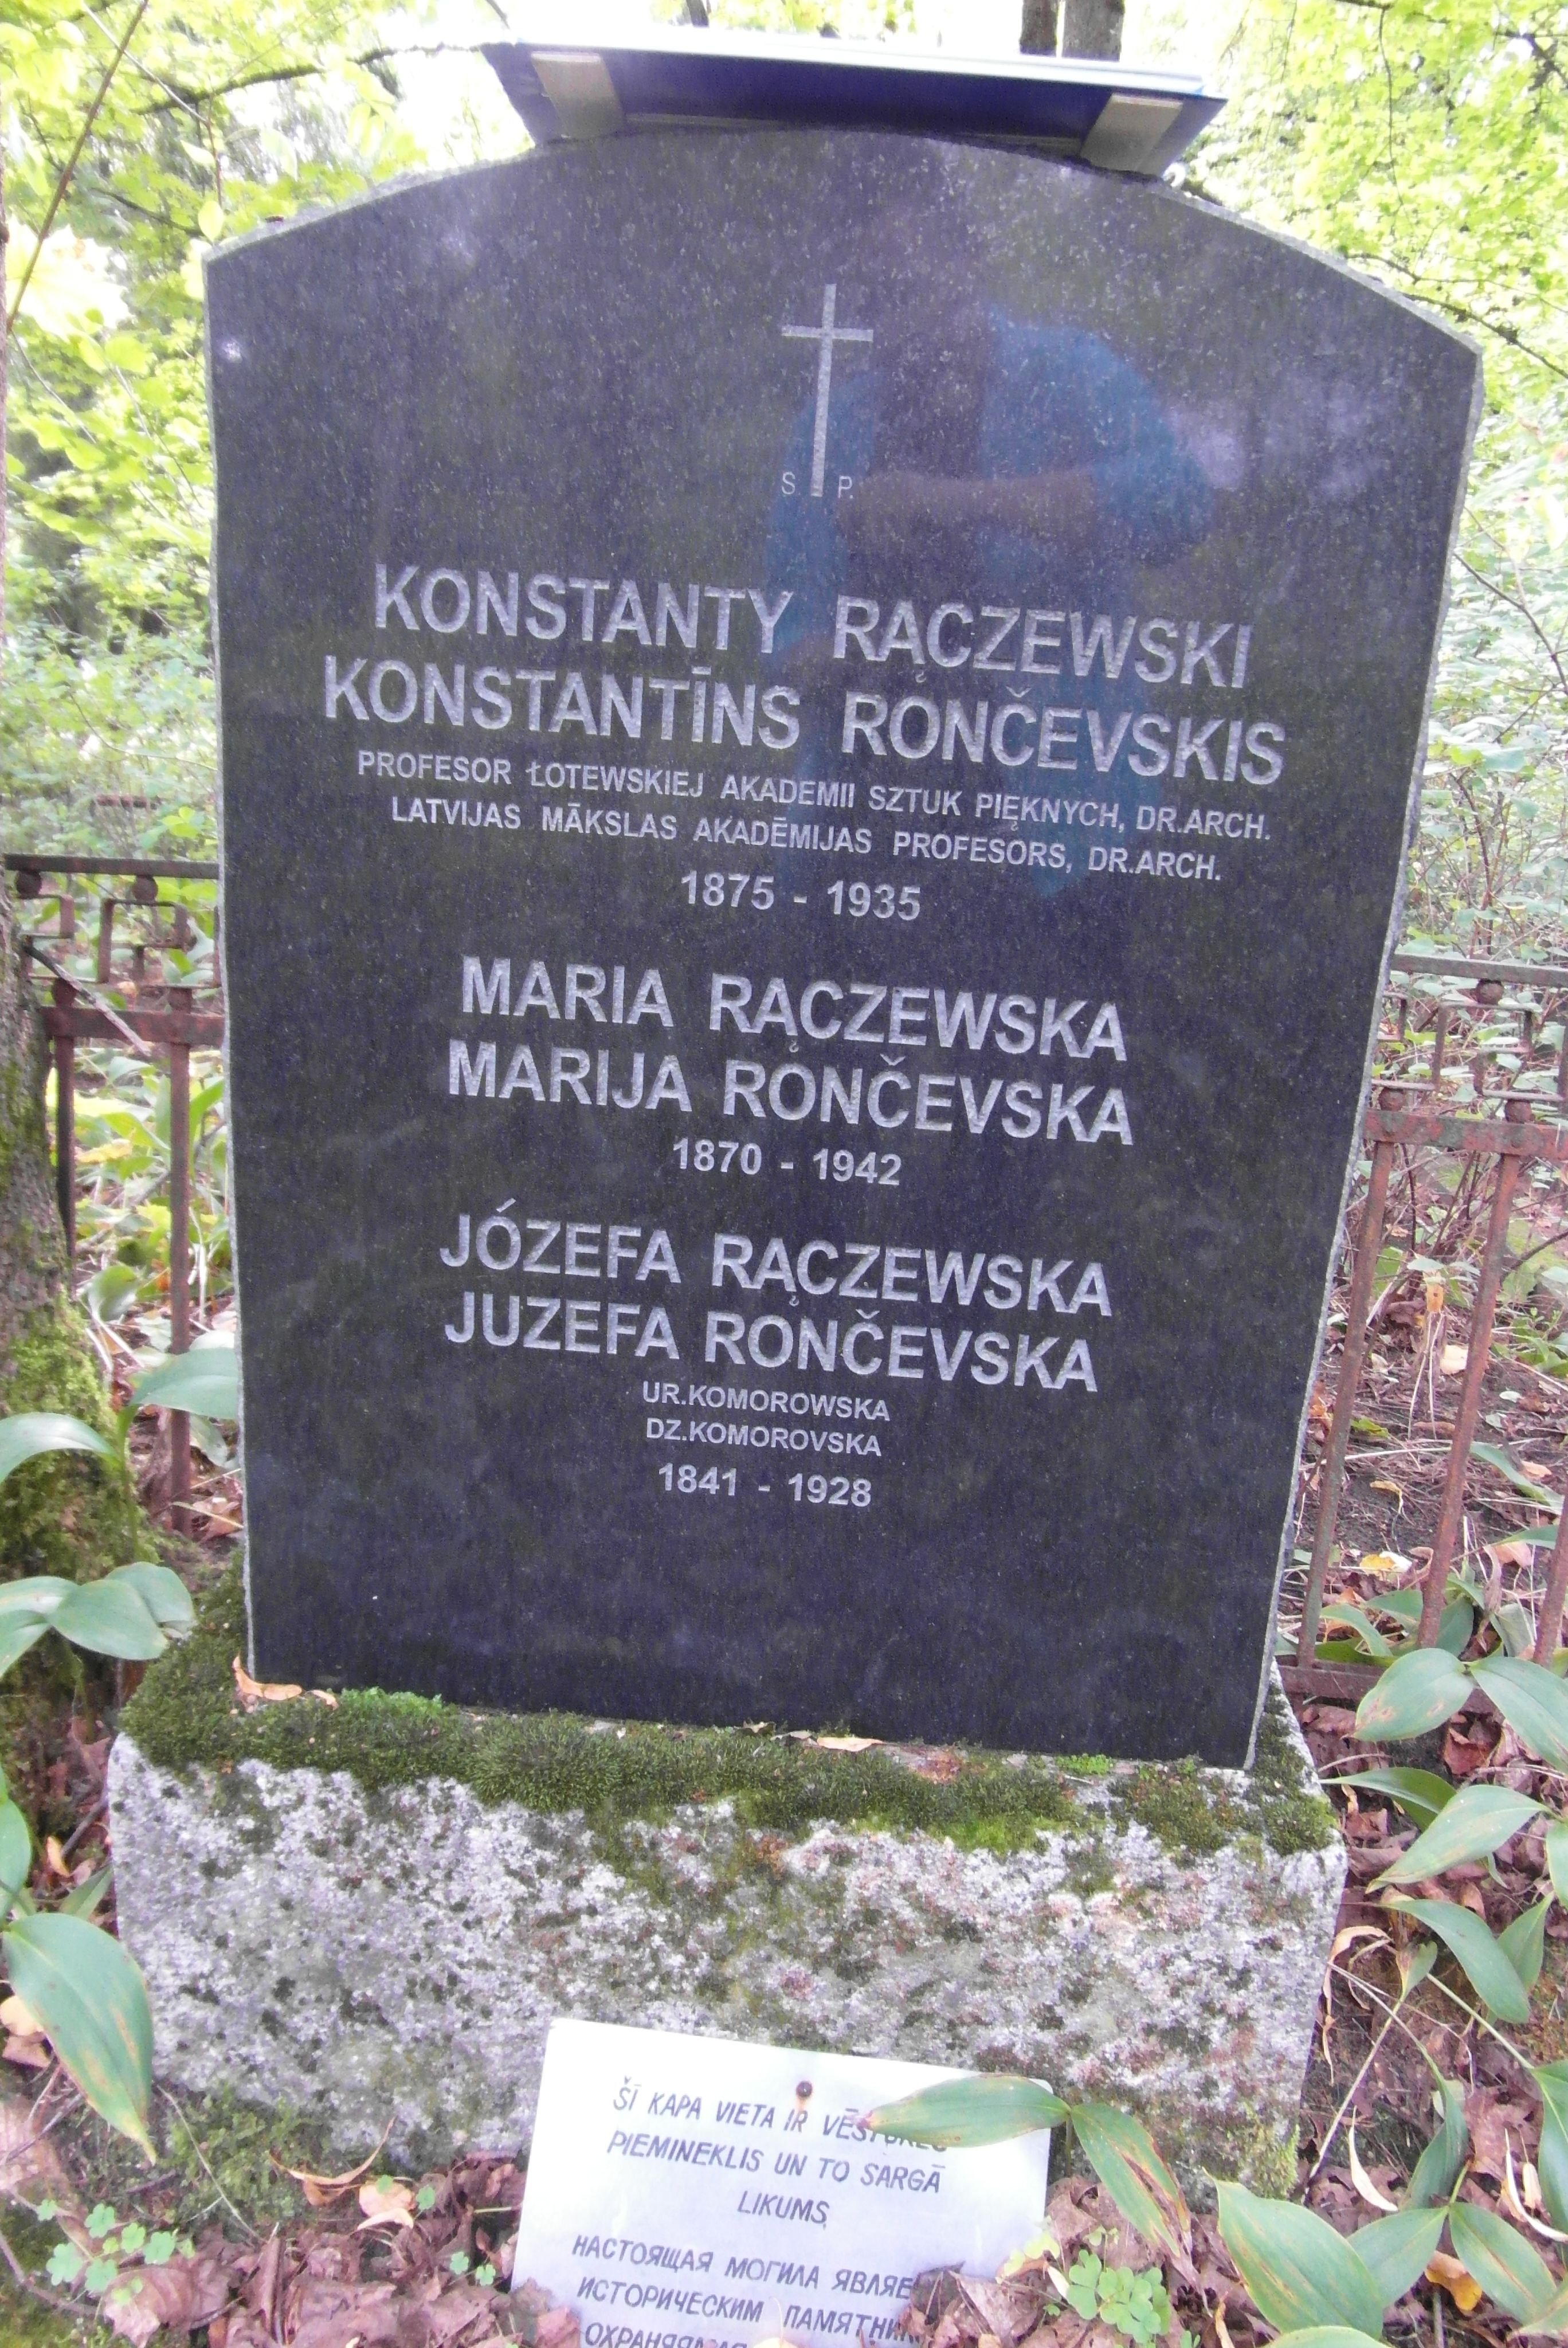 Inscription from the tombstone of the Rączewski family, St Michael's cemetery in Riga, as of 2021.